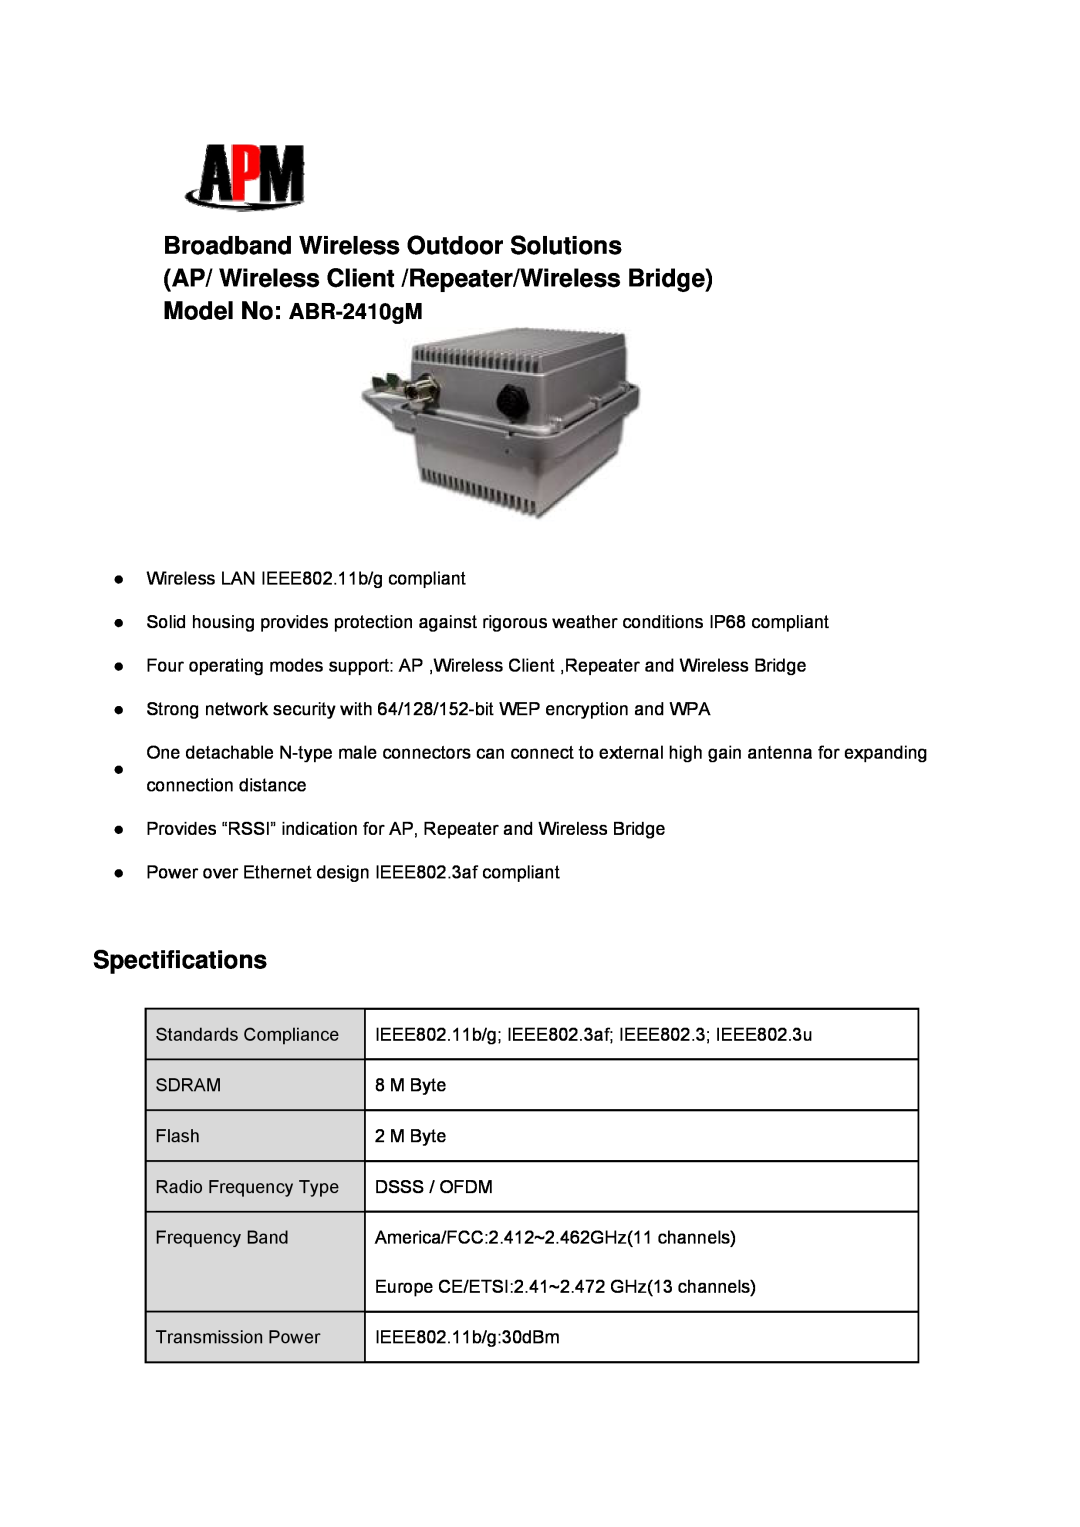 APM ABR-2410gM manual Broadband Wireless Outdoor Solutions, Spectifications 